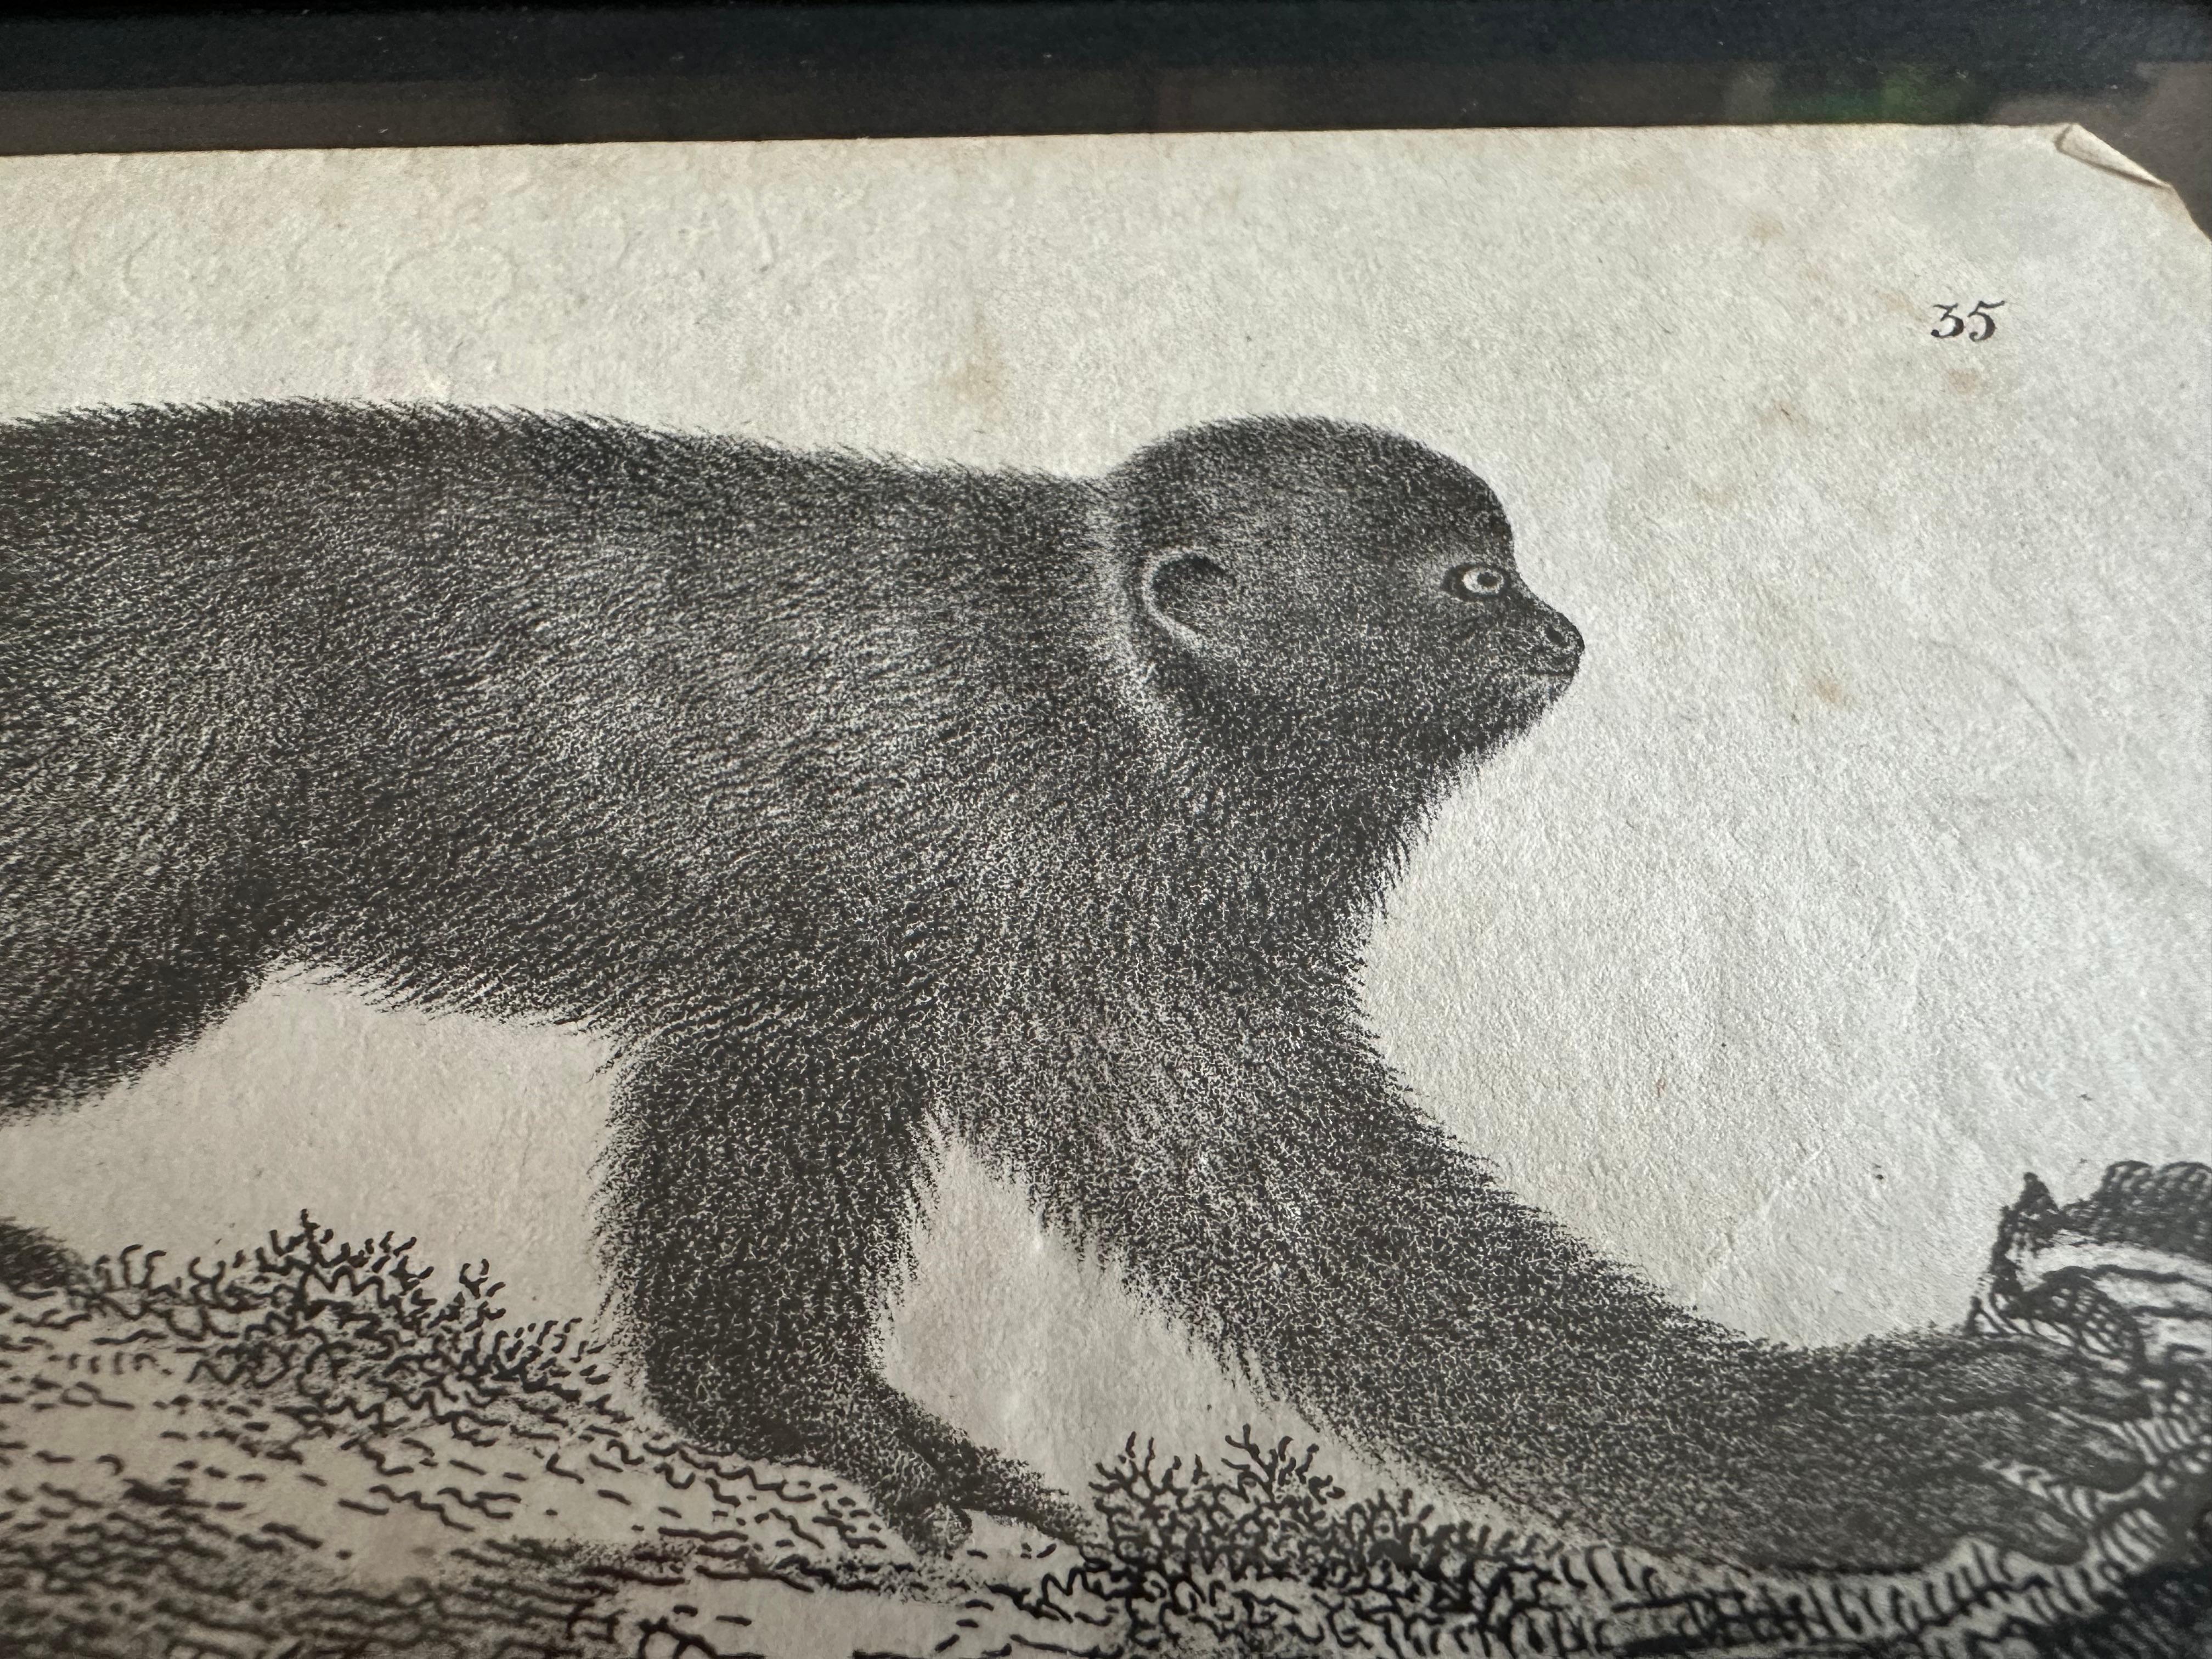 Zoological Original Lithograph Featuring a Monkey from 1831-35 For Sale 3